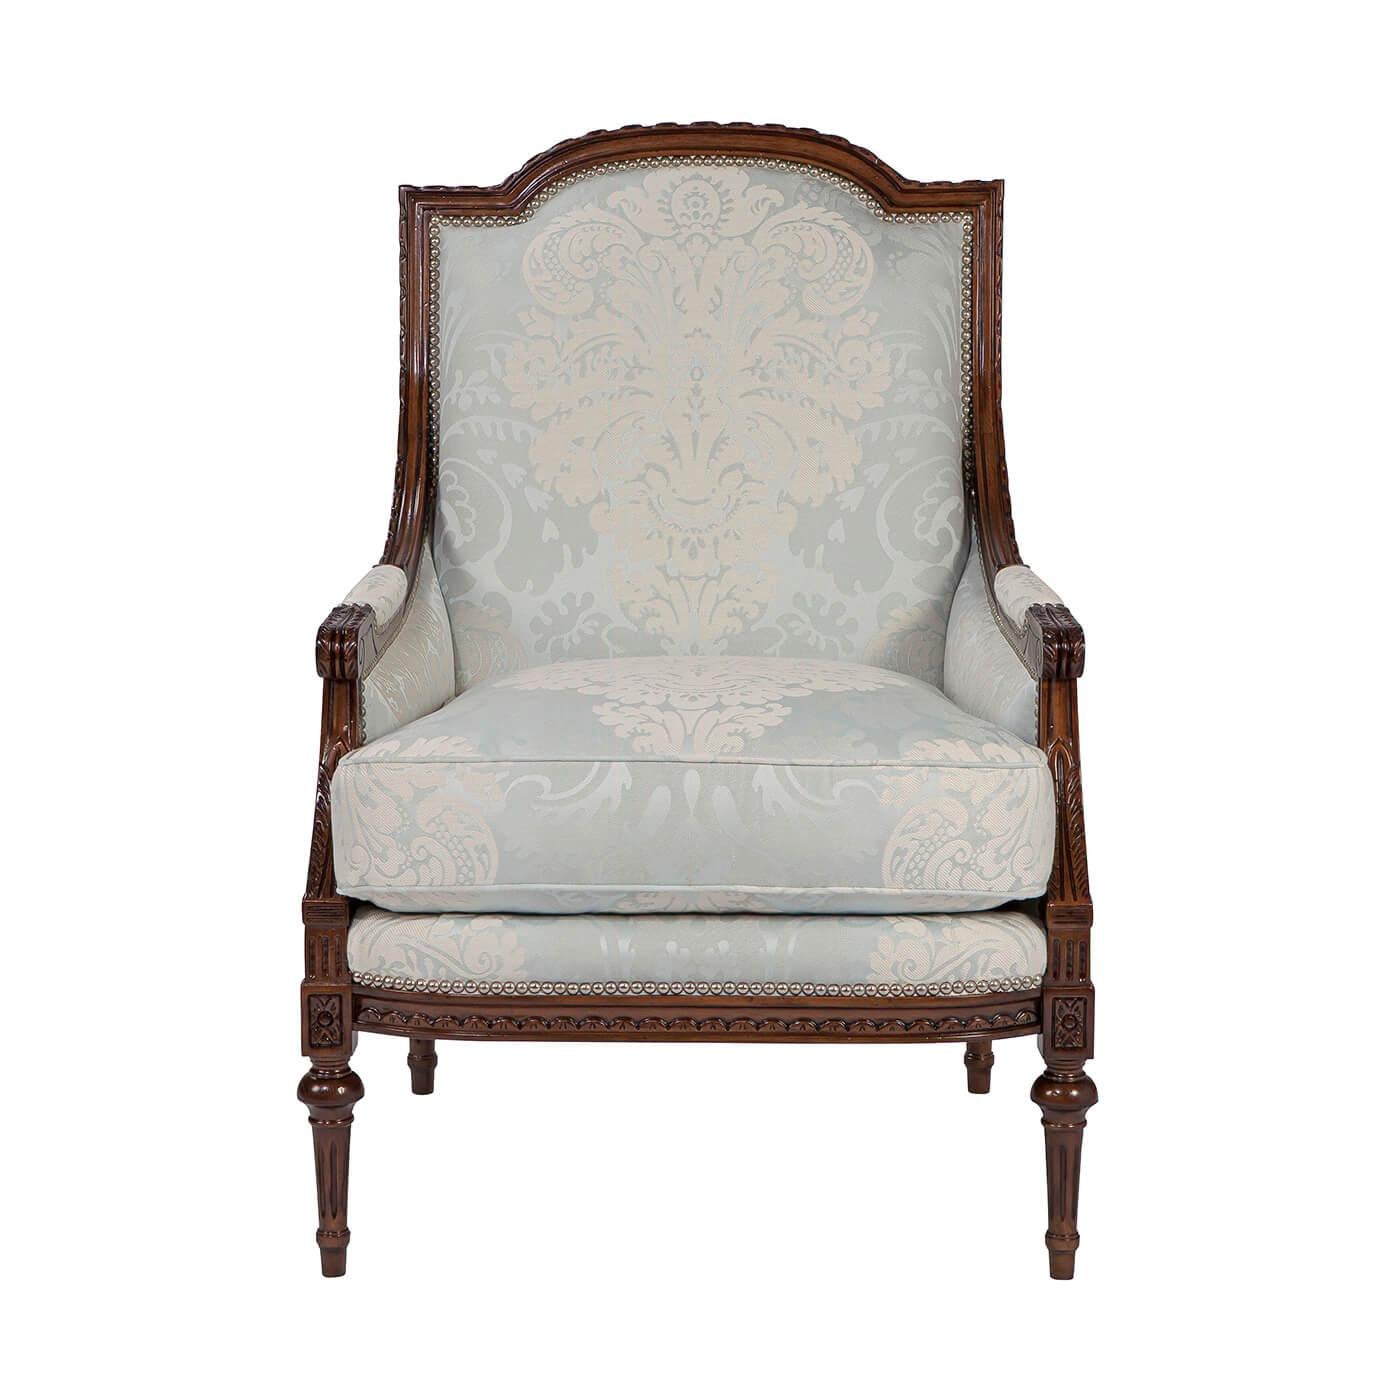 A finely carved fauteuil, the paper twist carved, arched top rail and down swept padded arms with scroll terminals enclosing an upholstered back and cushion seat with close nailed decoration, on a finely carved seat rail with flowerhead capitals to